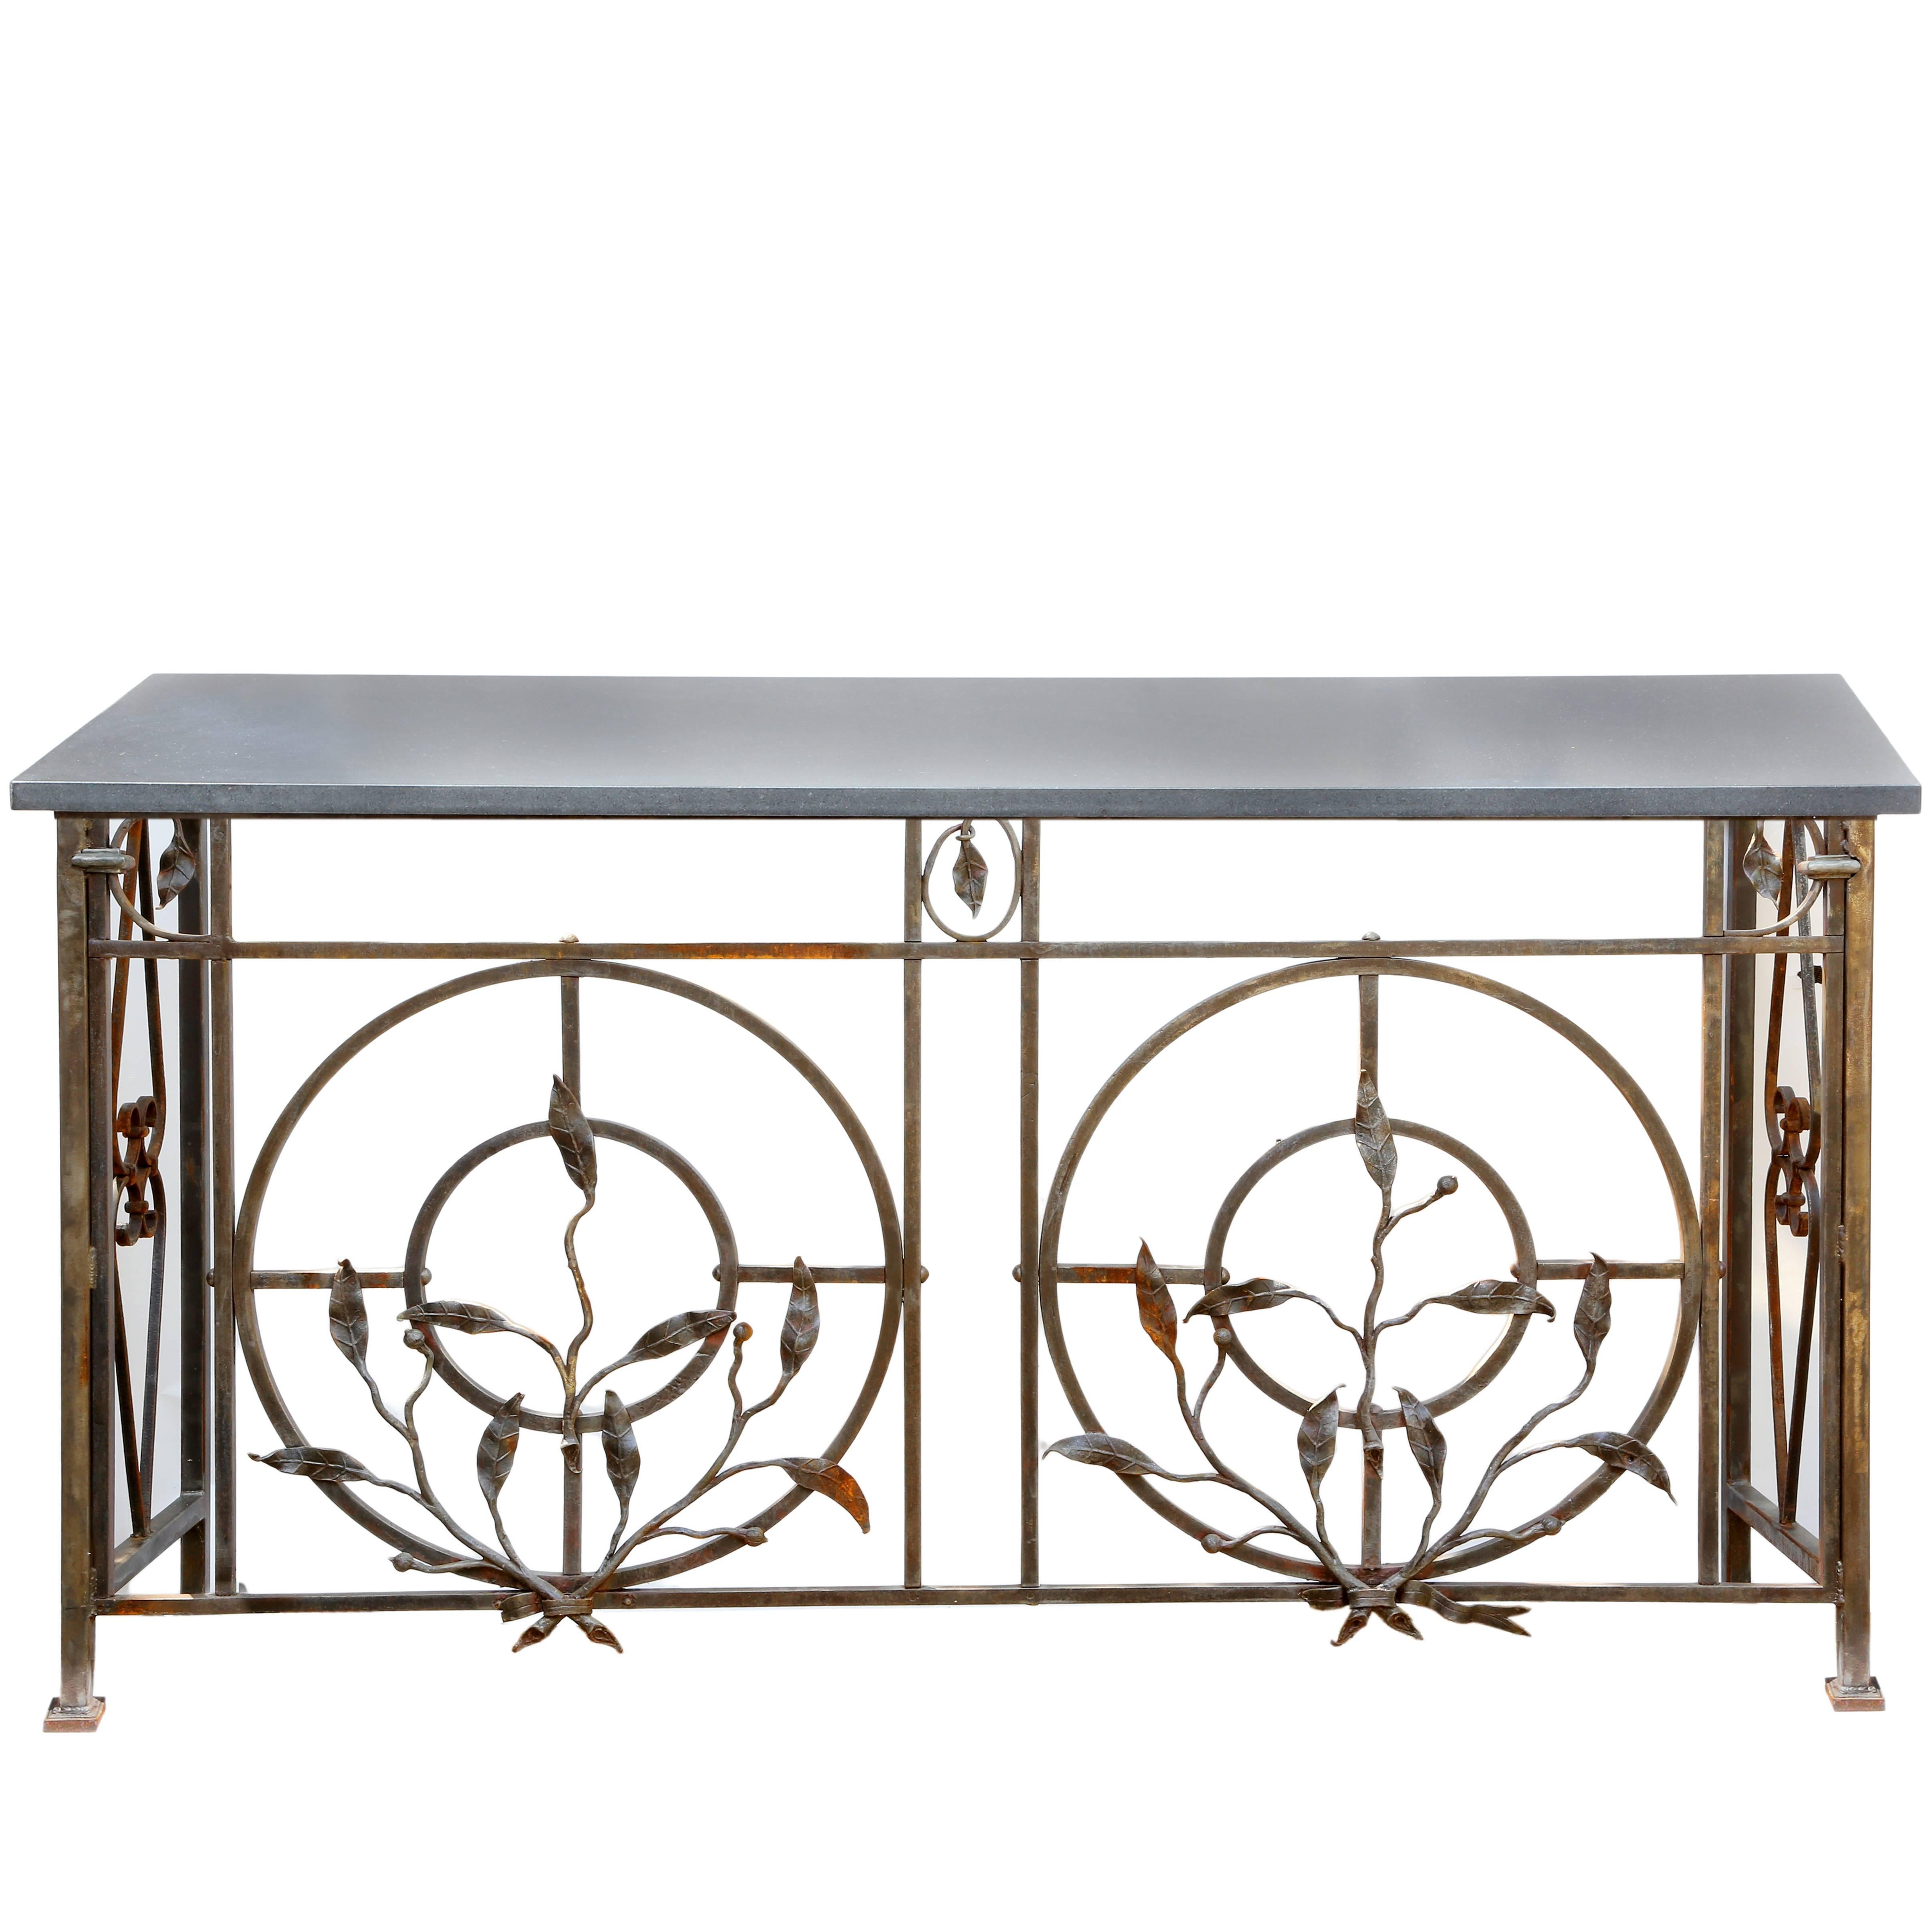 Antique French Ironwork Console